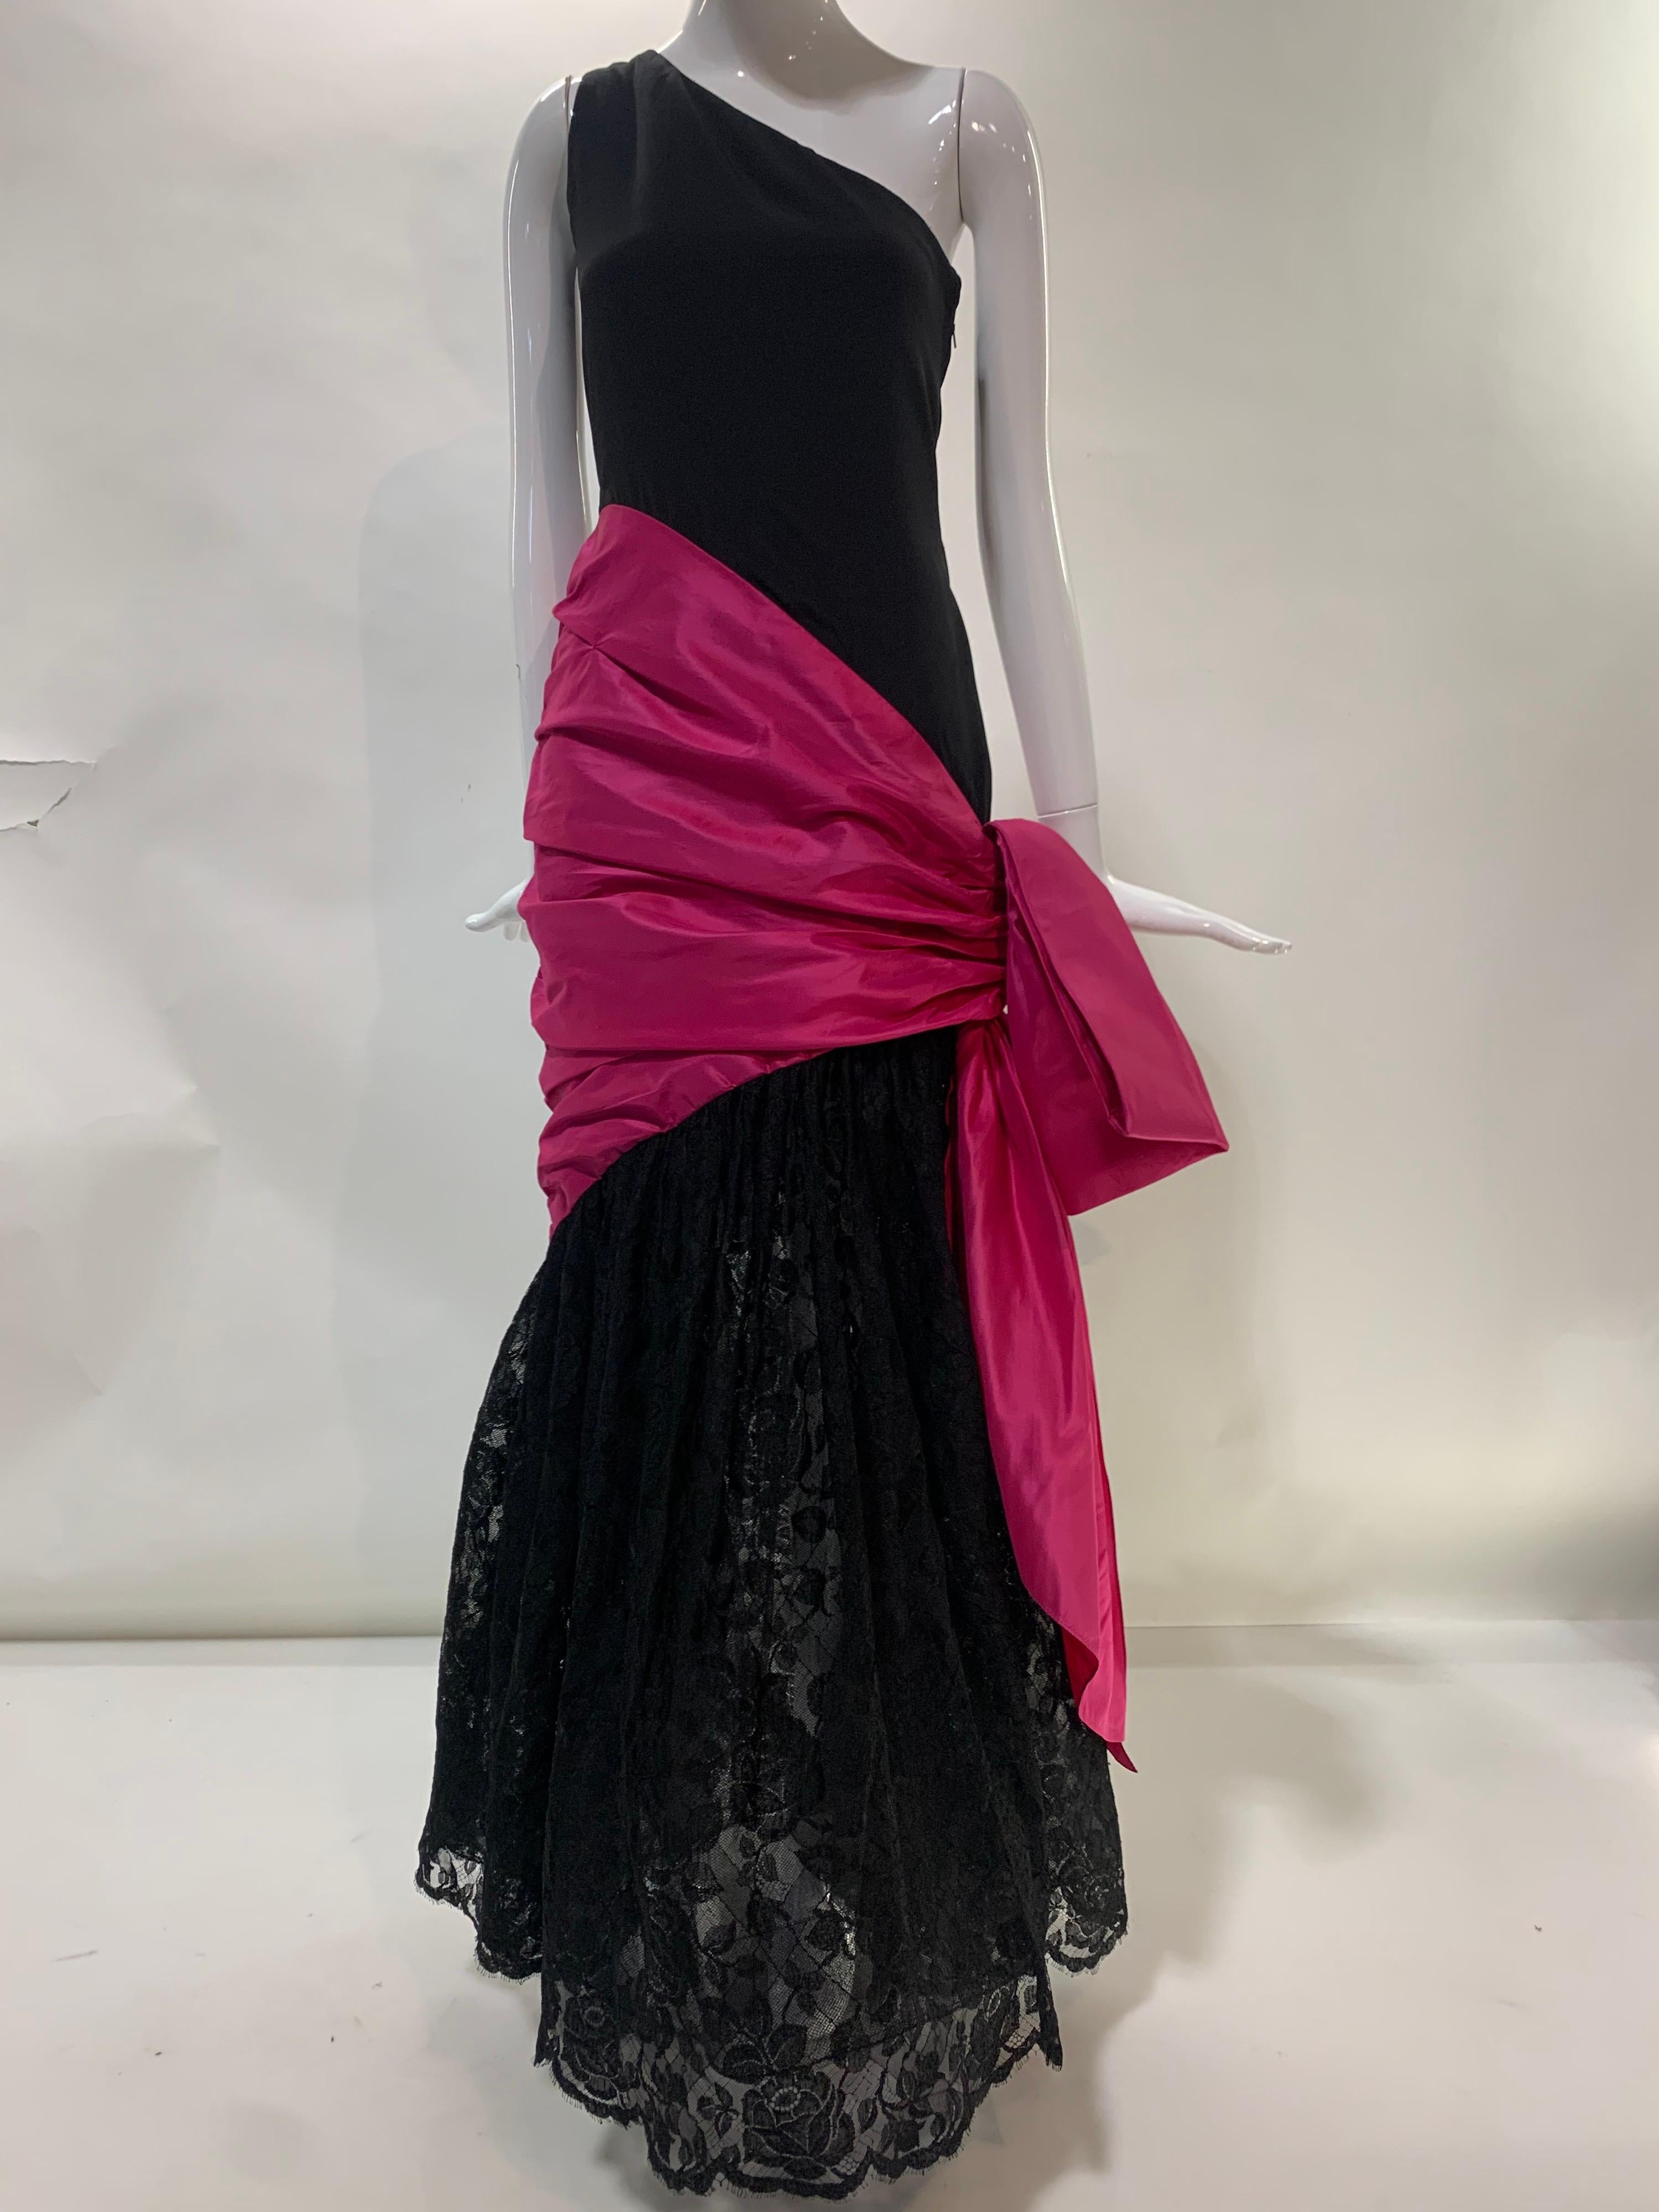 A fantastic late 1970s to 1980 Bill Blass black silk crepe one-shoulder evening gown with a black lace flared skirt. At hip is a wide band of fuchsia silk taffeta side-slung structured bow, evoking a Spanish dancer's shawl tied about the waist.